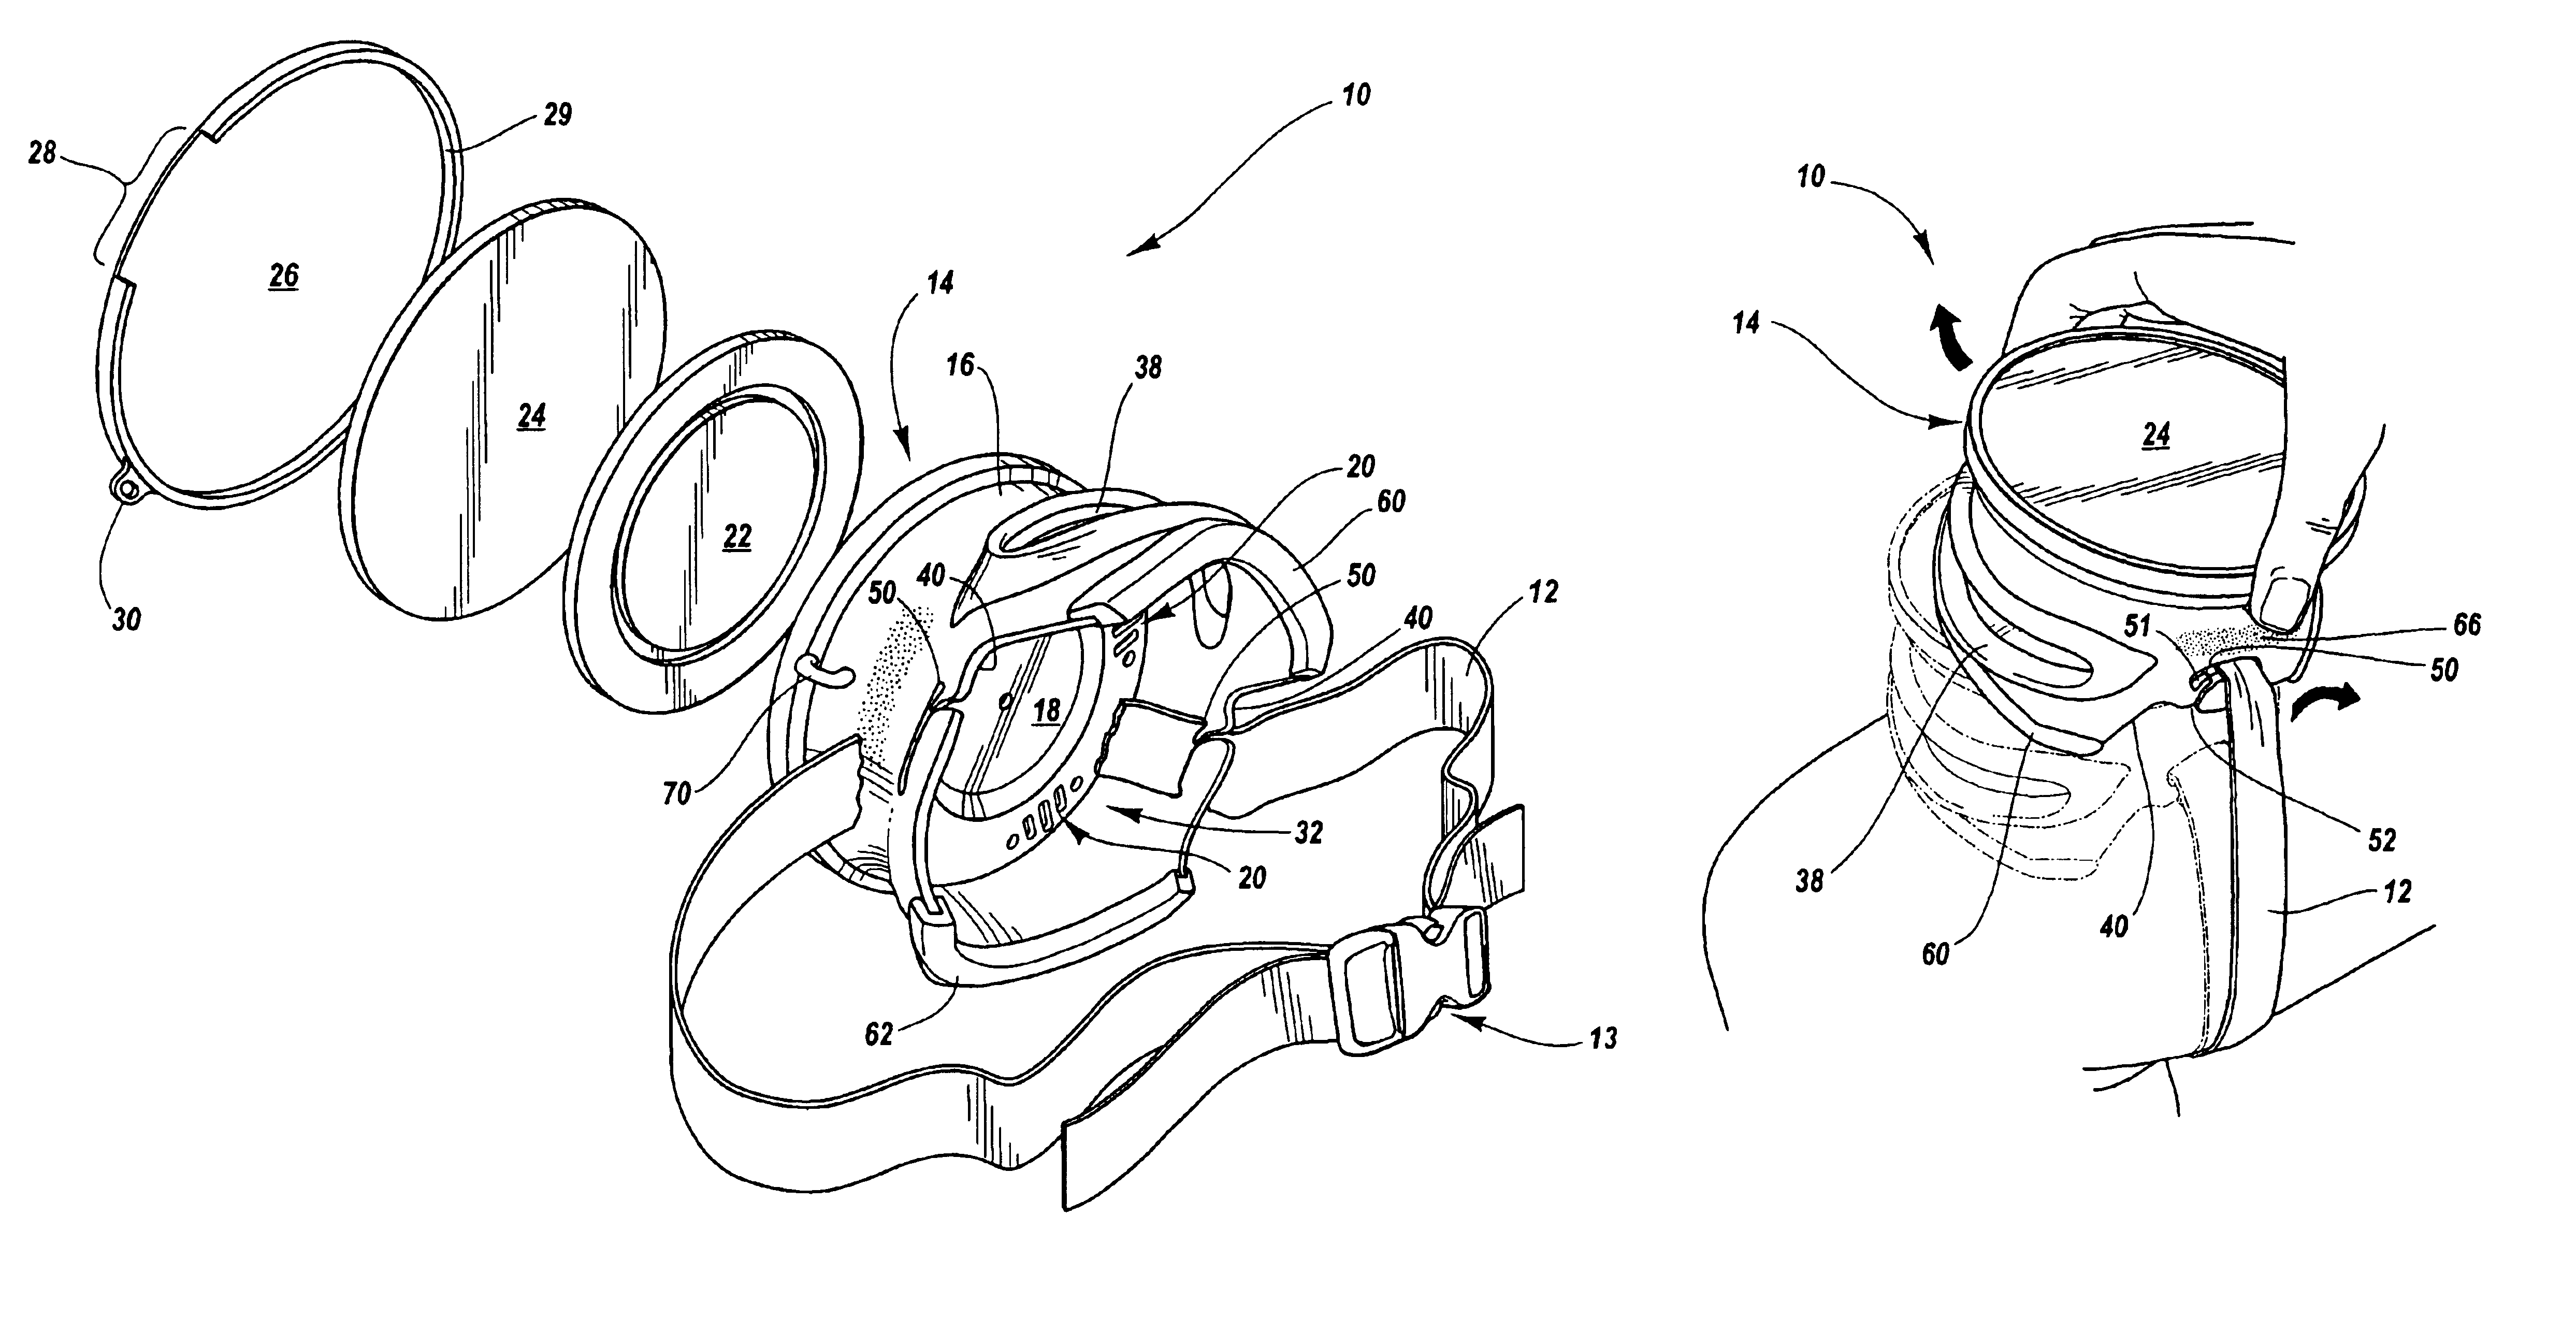 Friction game call apparatus with external sound chamber